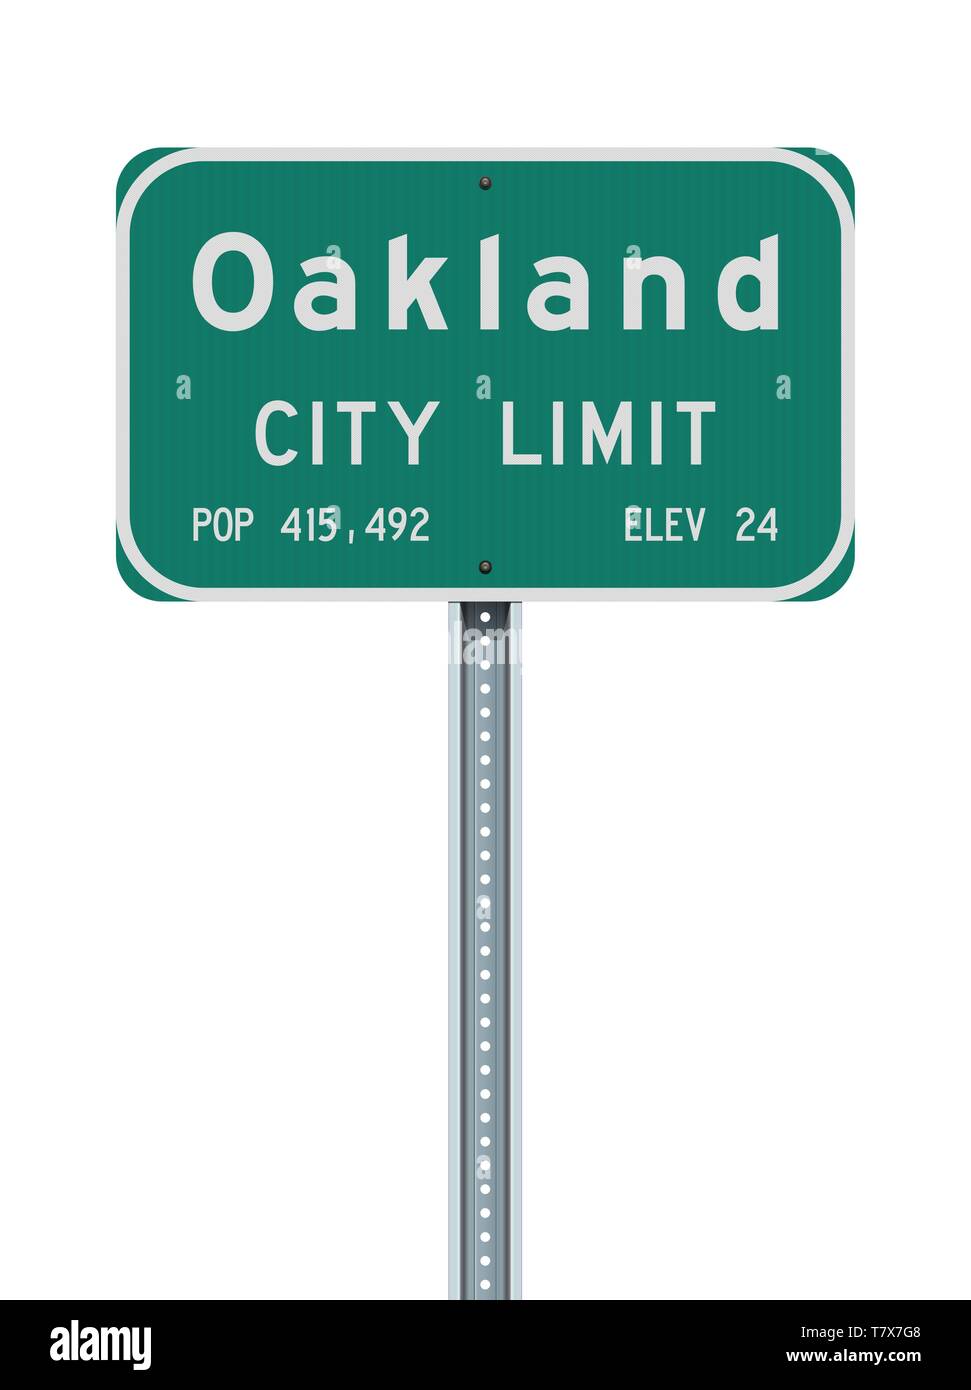 Vector illustration of the Oakland City Limit green road sign Stock Vector